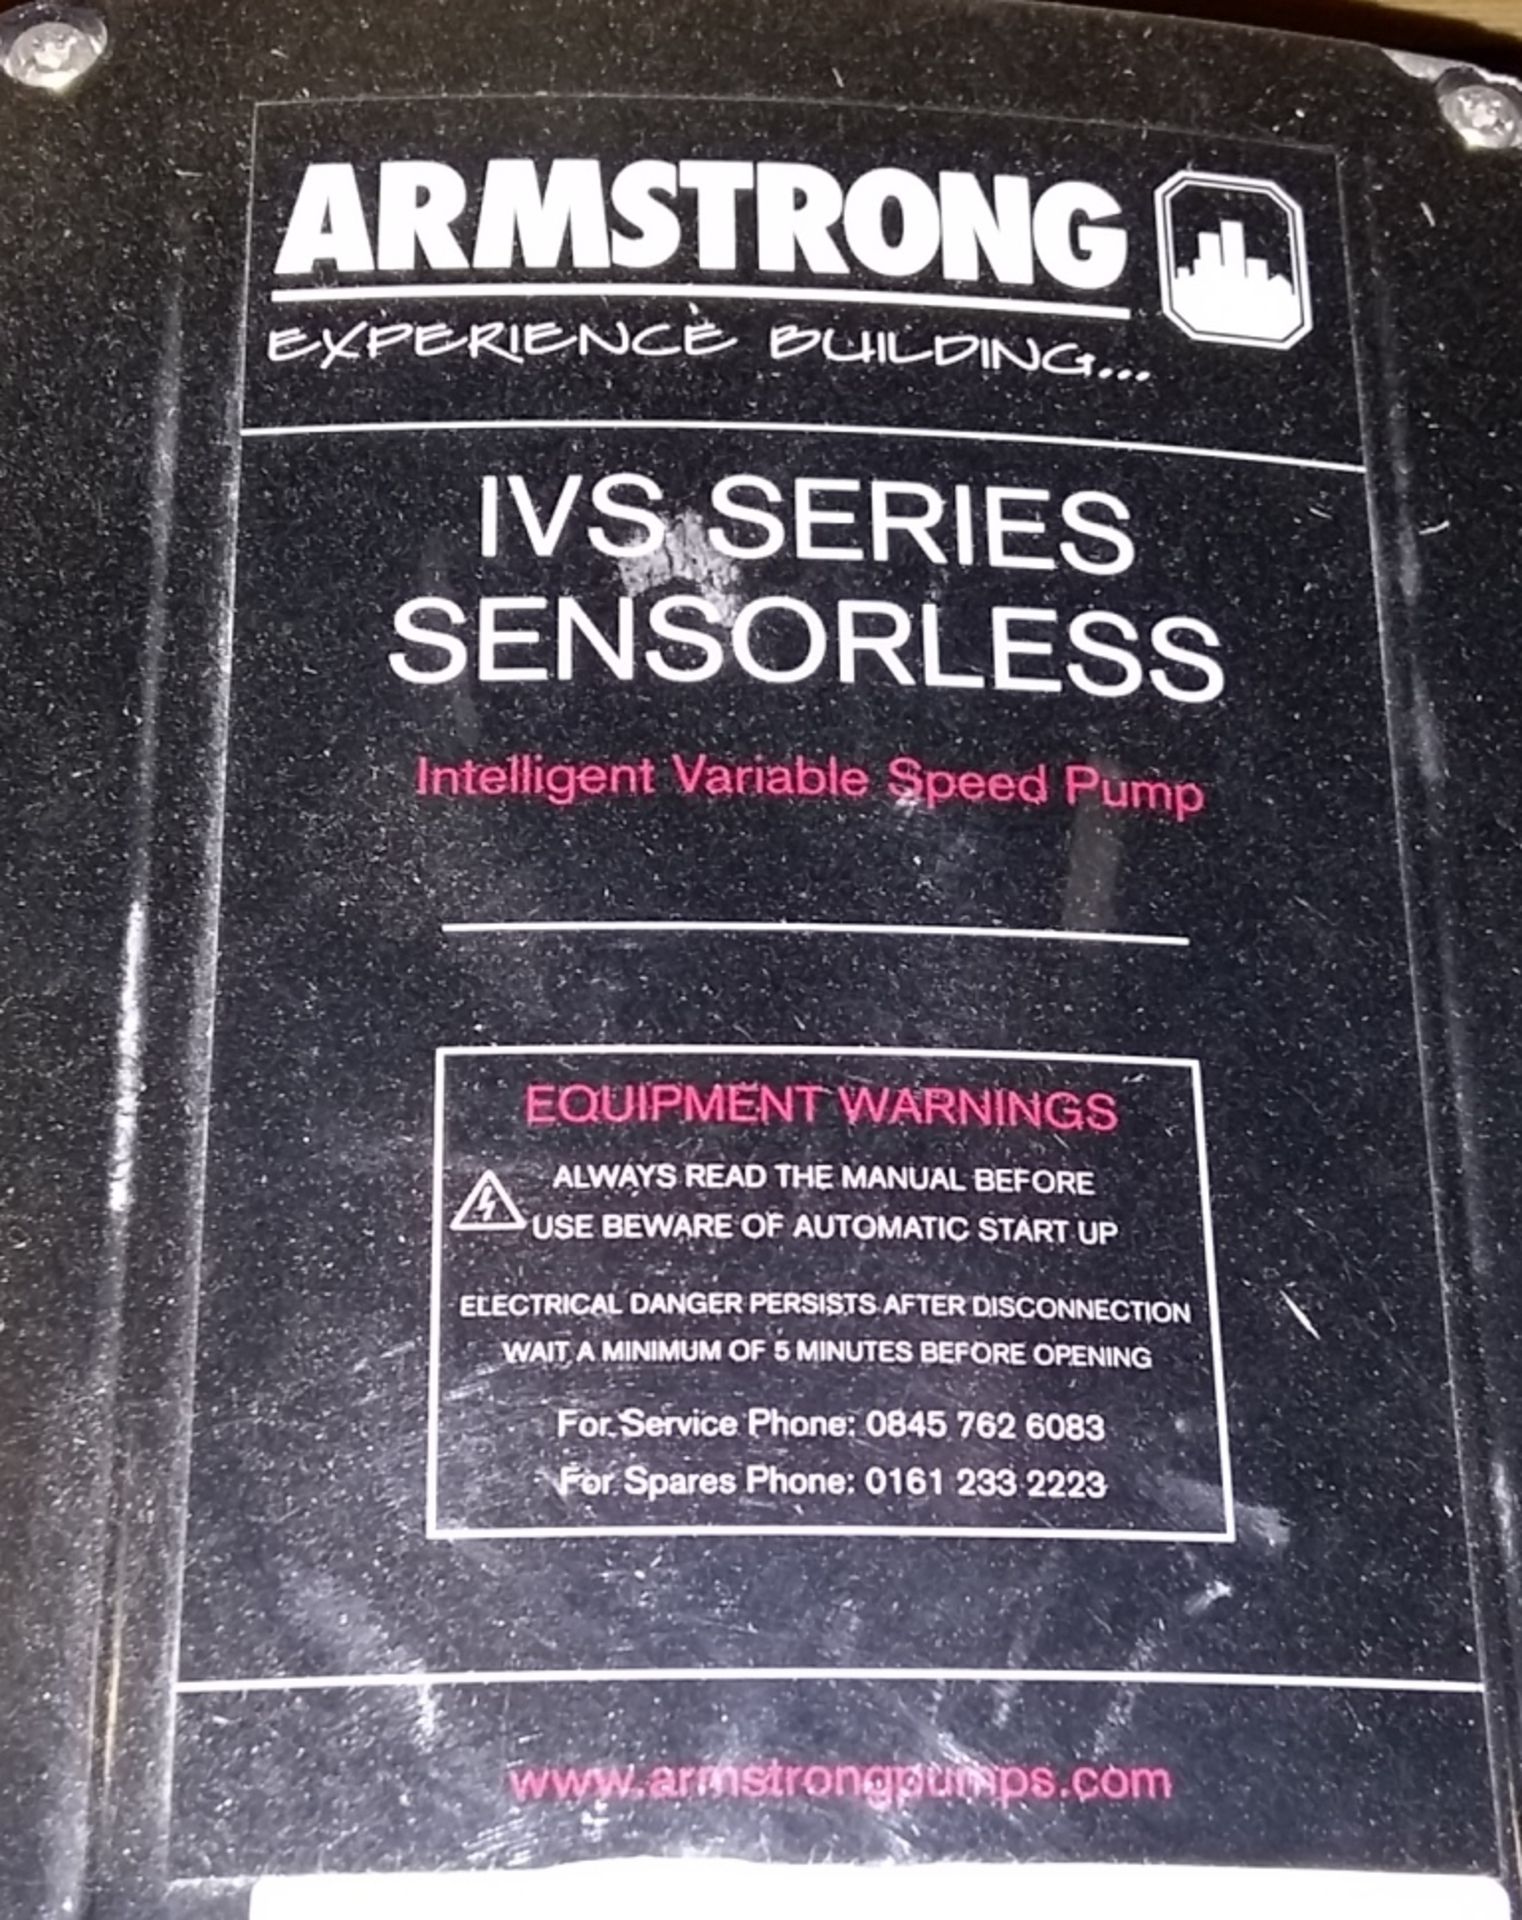 2x Armstrong IVS series sensorless gate vales 4380 IVS - Image 2 of 3